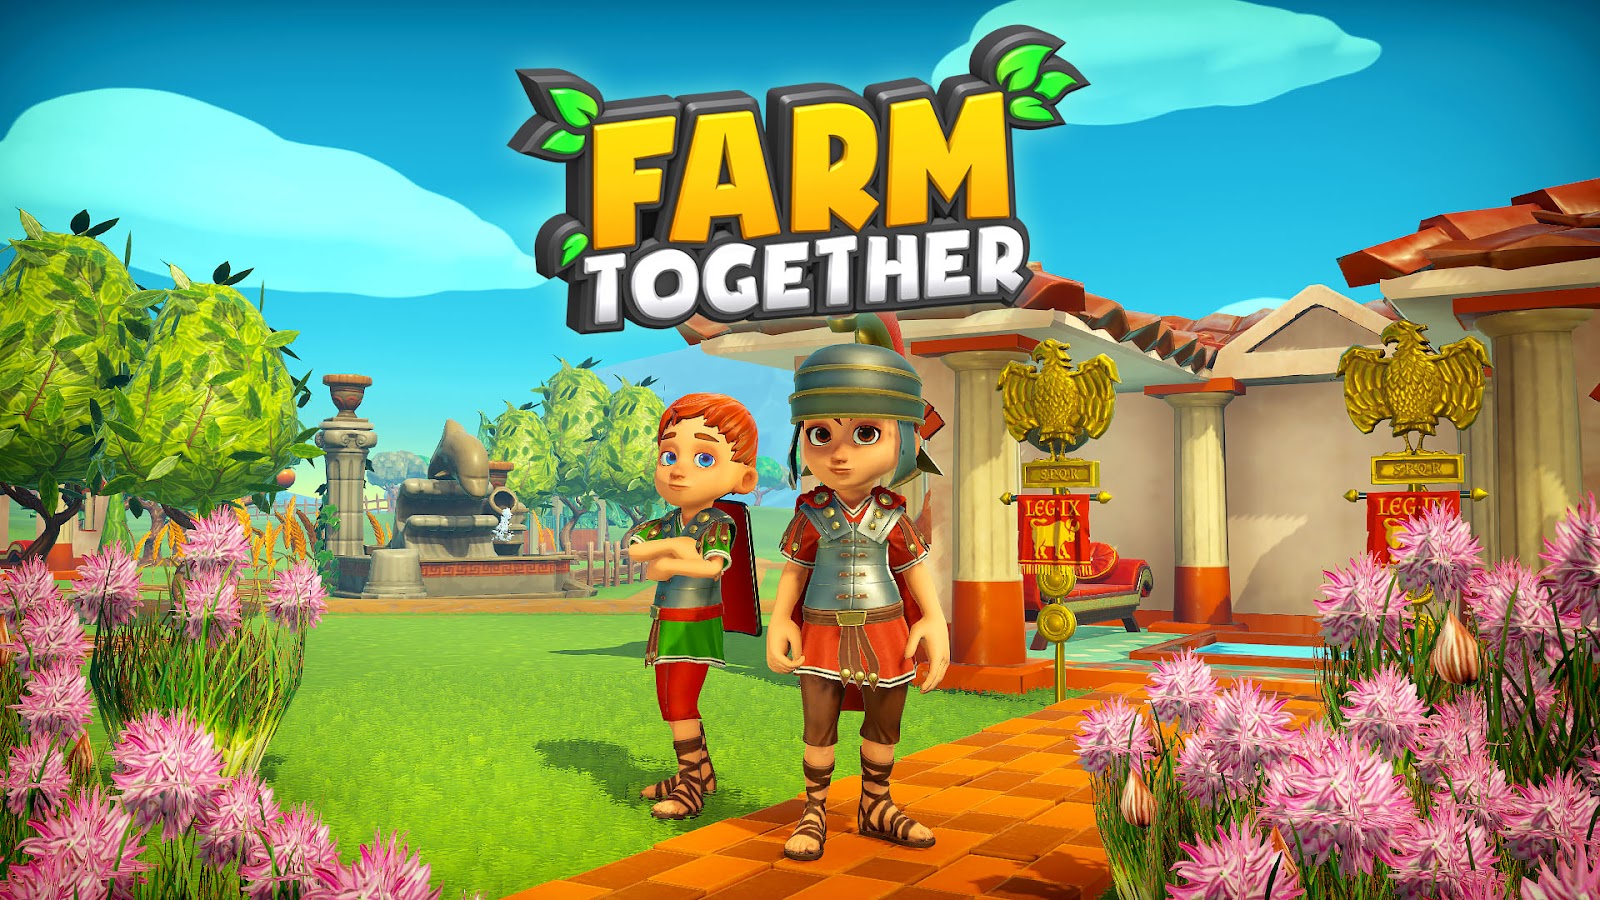 Games Like Animal Crossing For Xbox - Farm Together